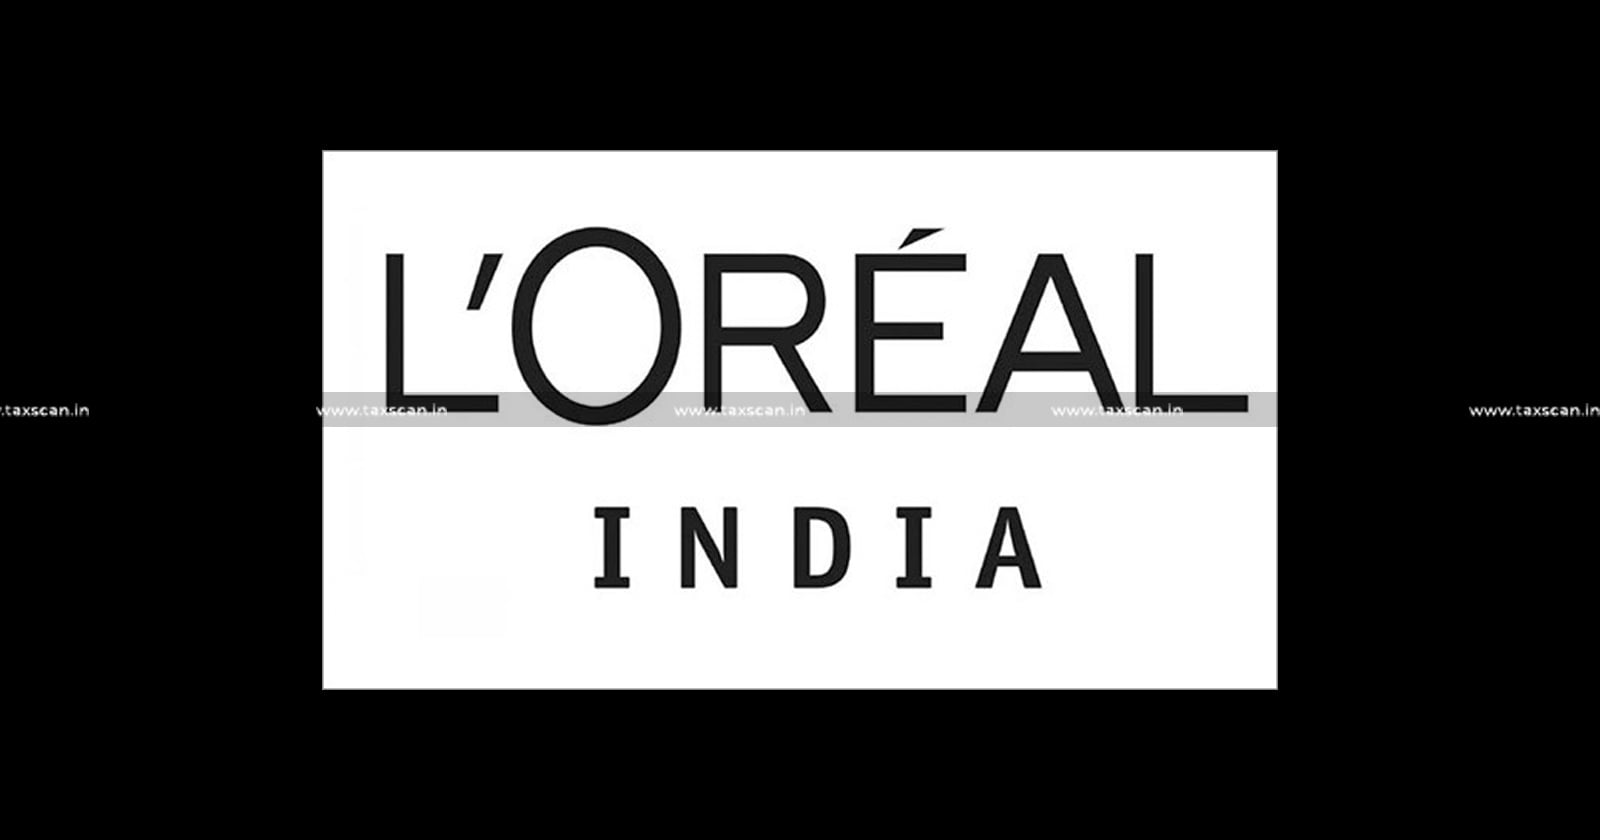 Provision of S. 92B not applicable for AMP expenses - Provision - AMP expenses - Business purpose - ITAT Grants Relief to L’oreal India - taxscan